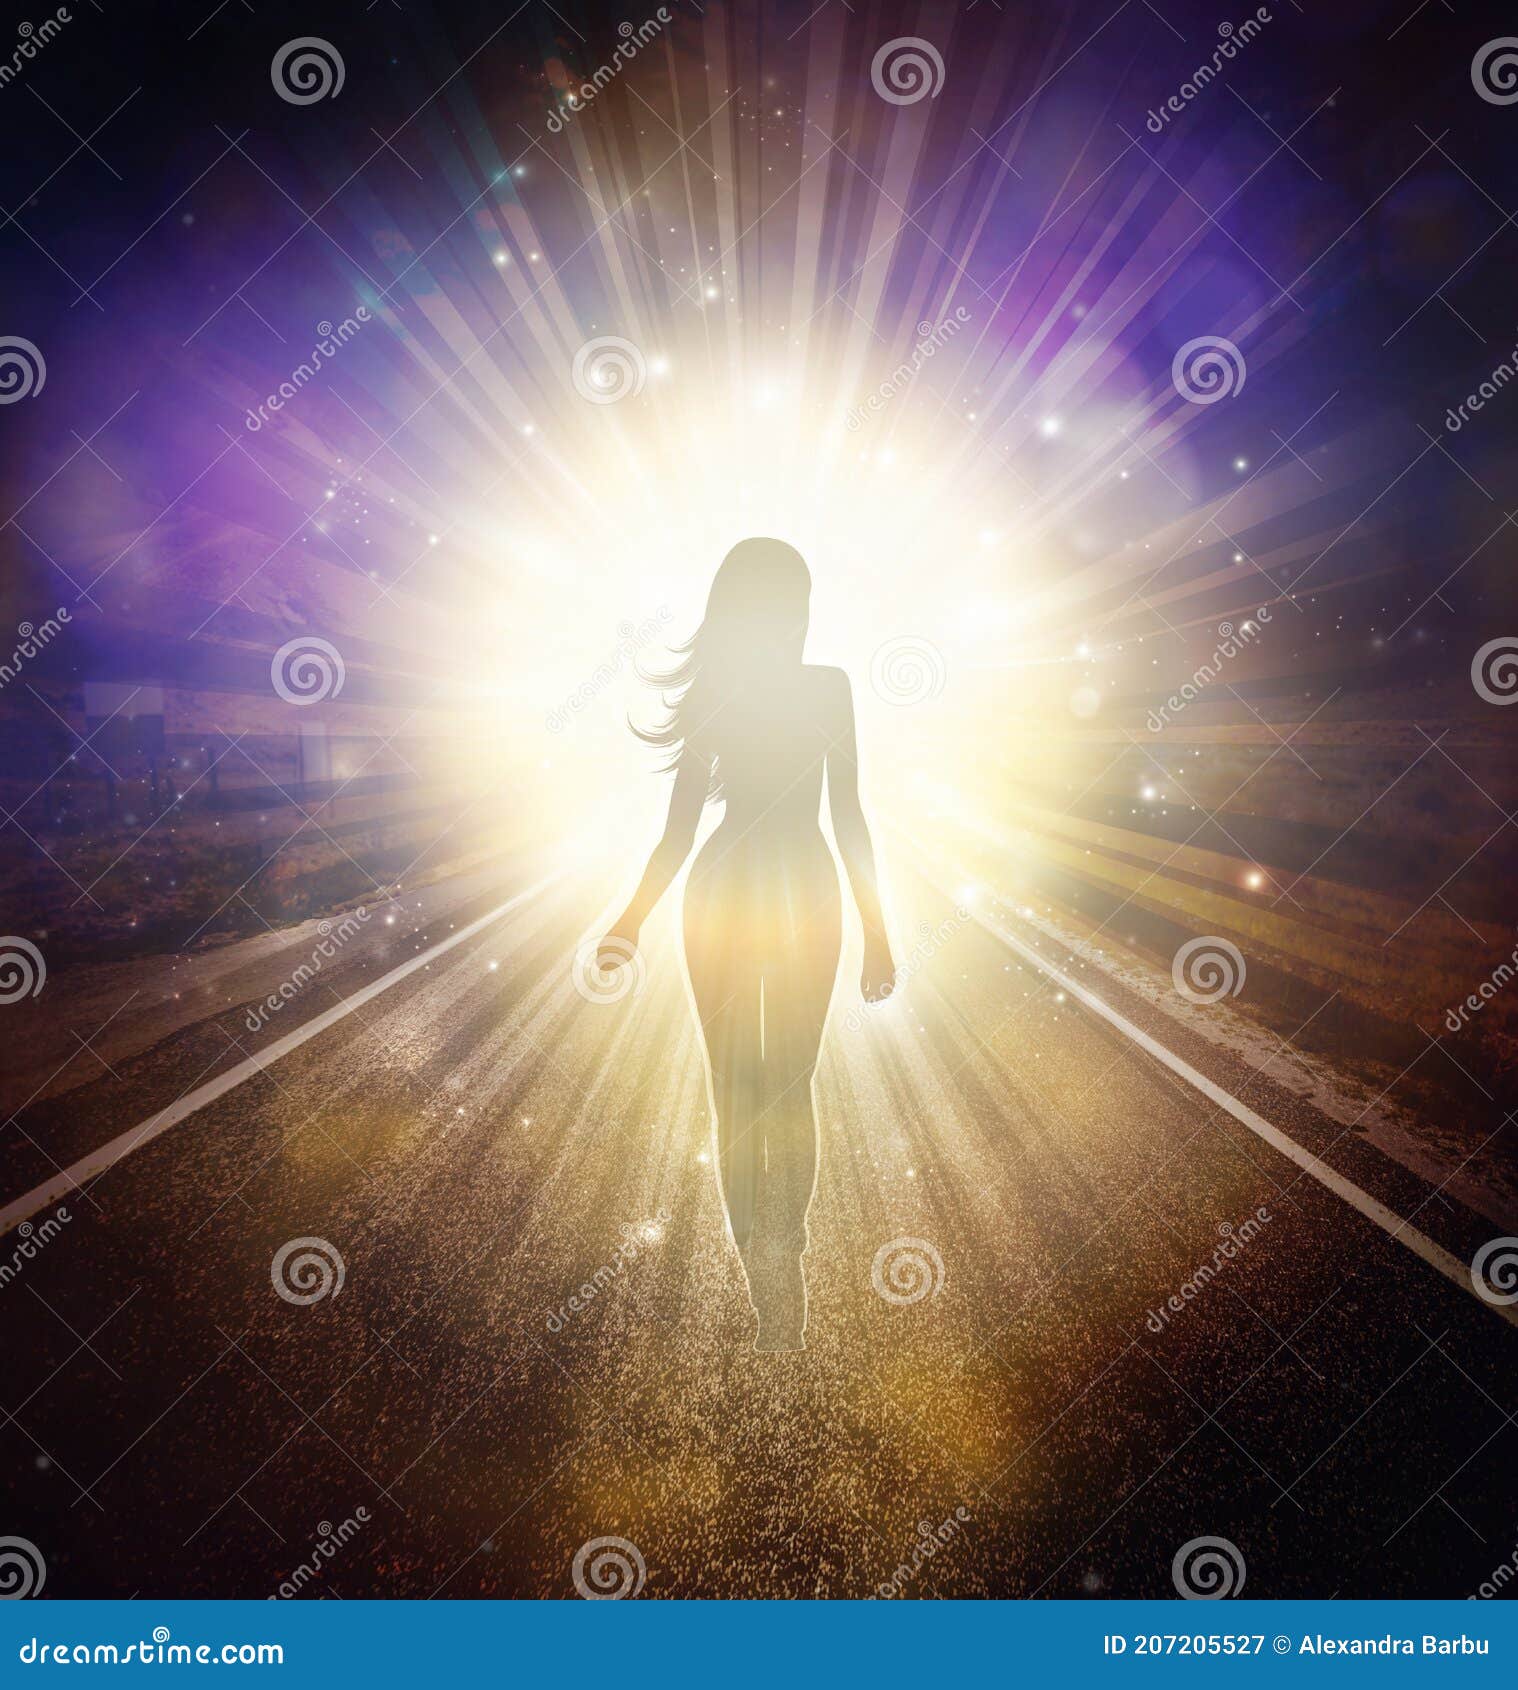 soul journey, portal to another universe, light being, unity wallpaper